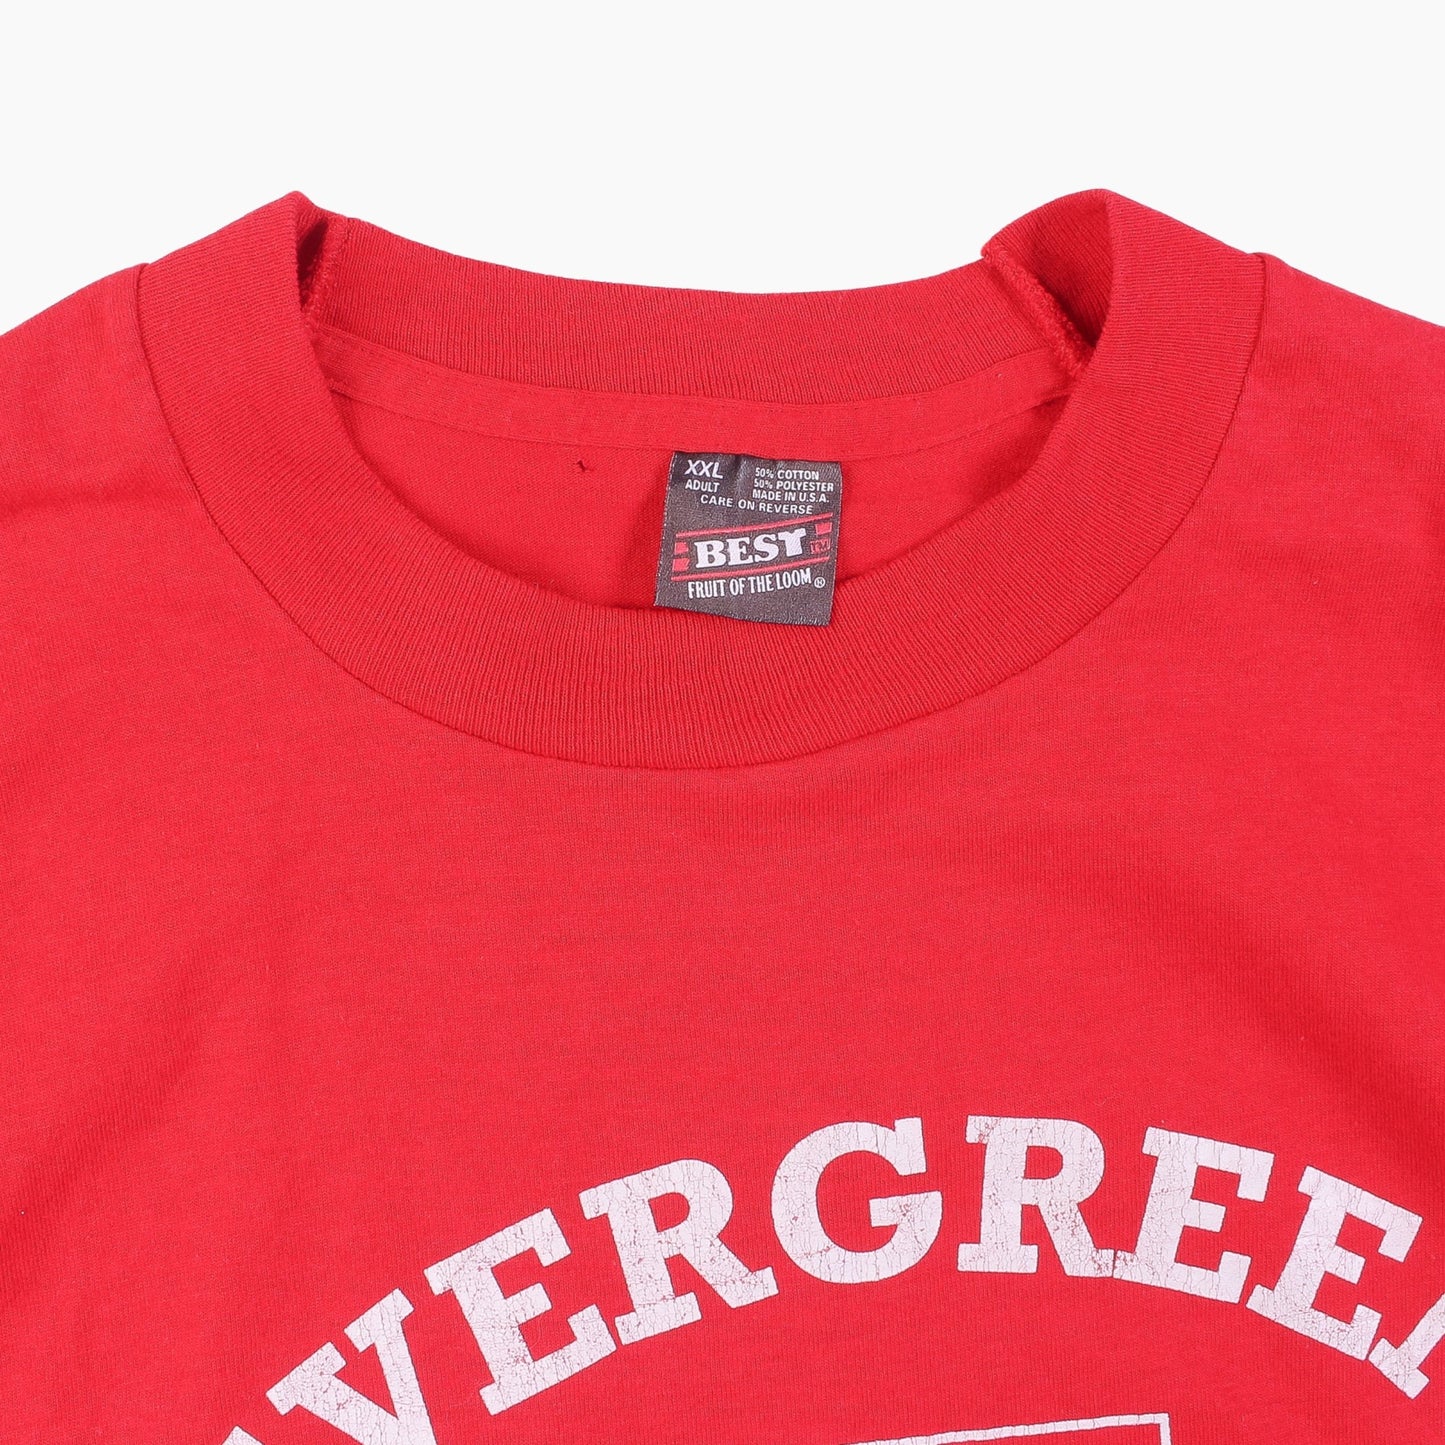 Vintage 'Evergreen Girls State' T-Shirt - American Madness